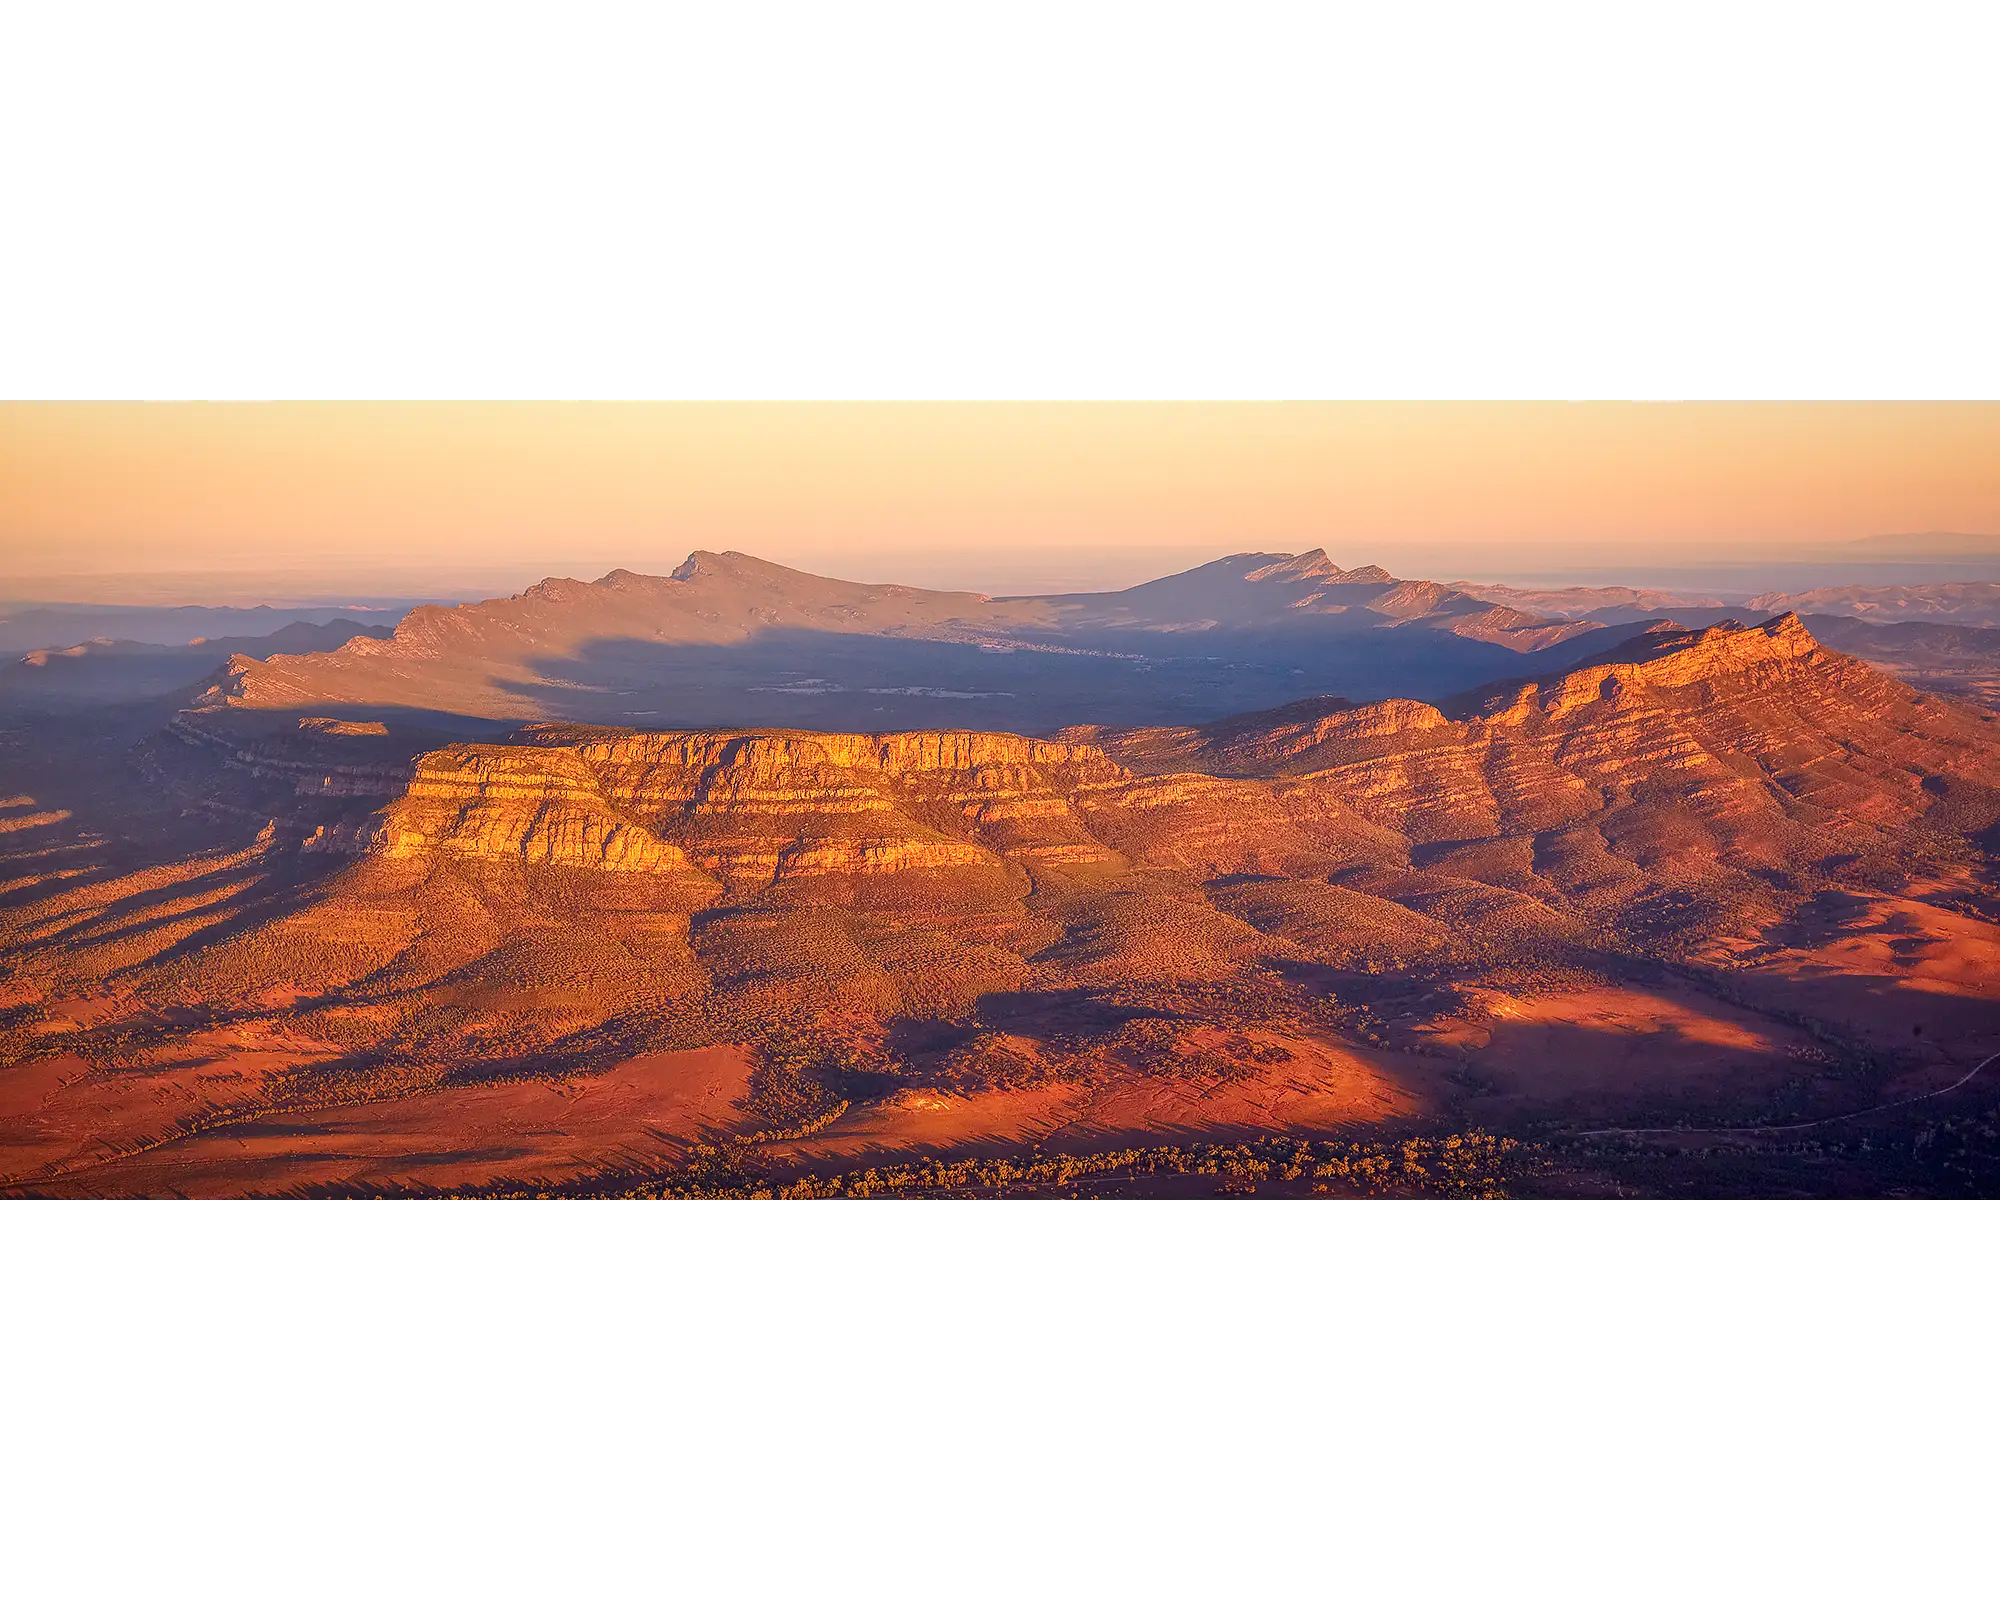 Wilpena Pound at sunrise from the air, Flinders Ranges, South Australia.